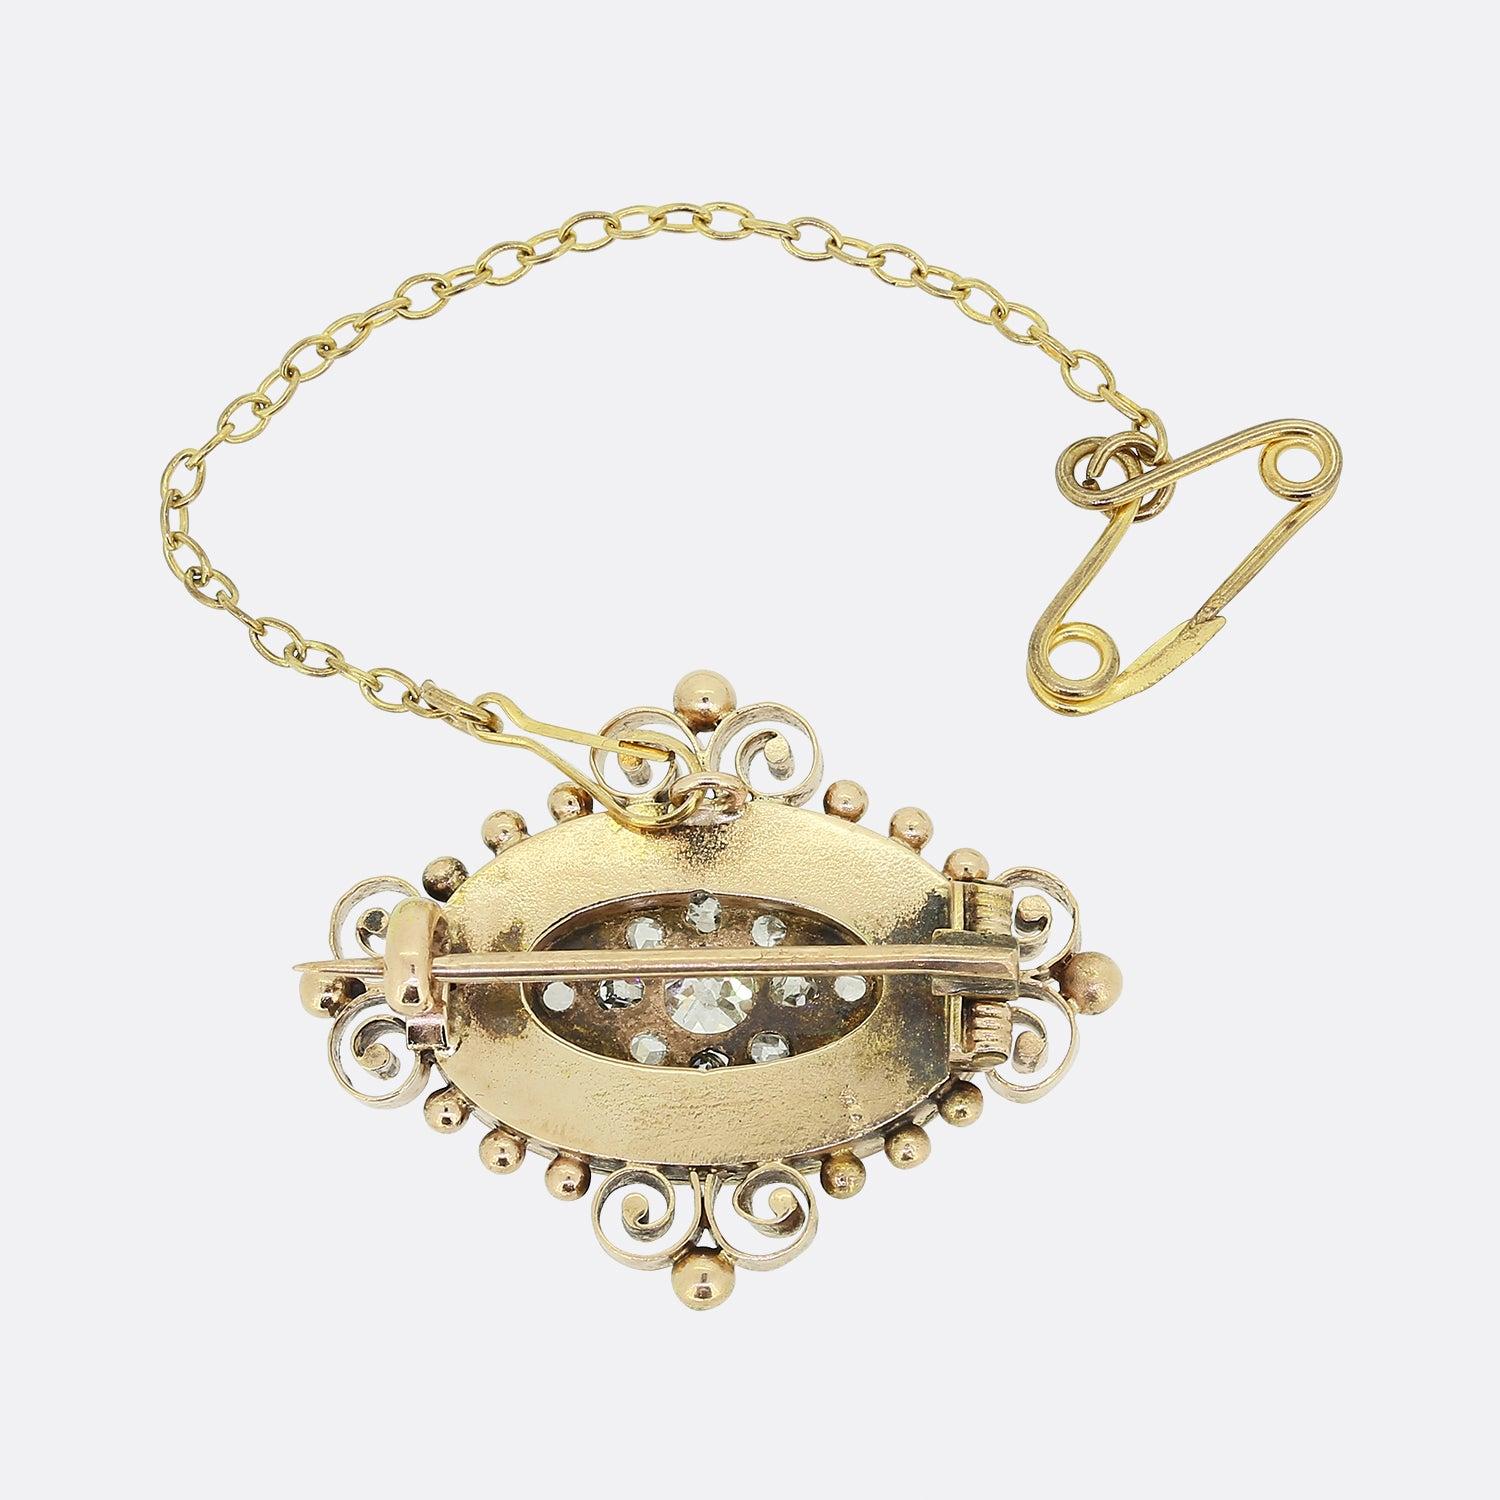 This is a wonderful diamond brooch from the Victorian era. The brooch is set with multiple old cut diamonds in a star shaped setting crafted in 15ct yellow gold. The brooch also features a secure c clasp and safety chain on the back for added safety